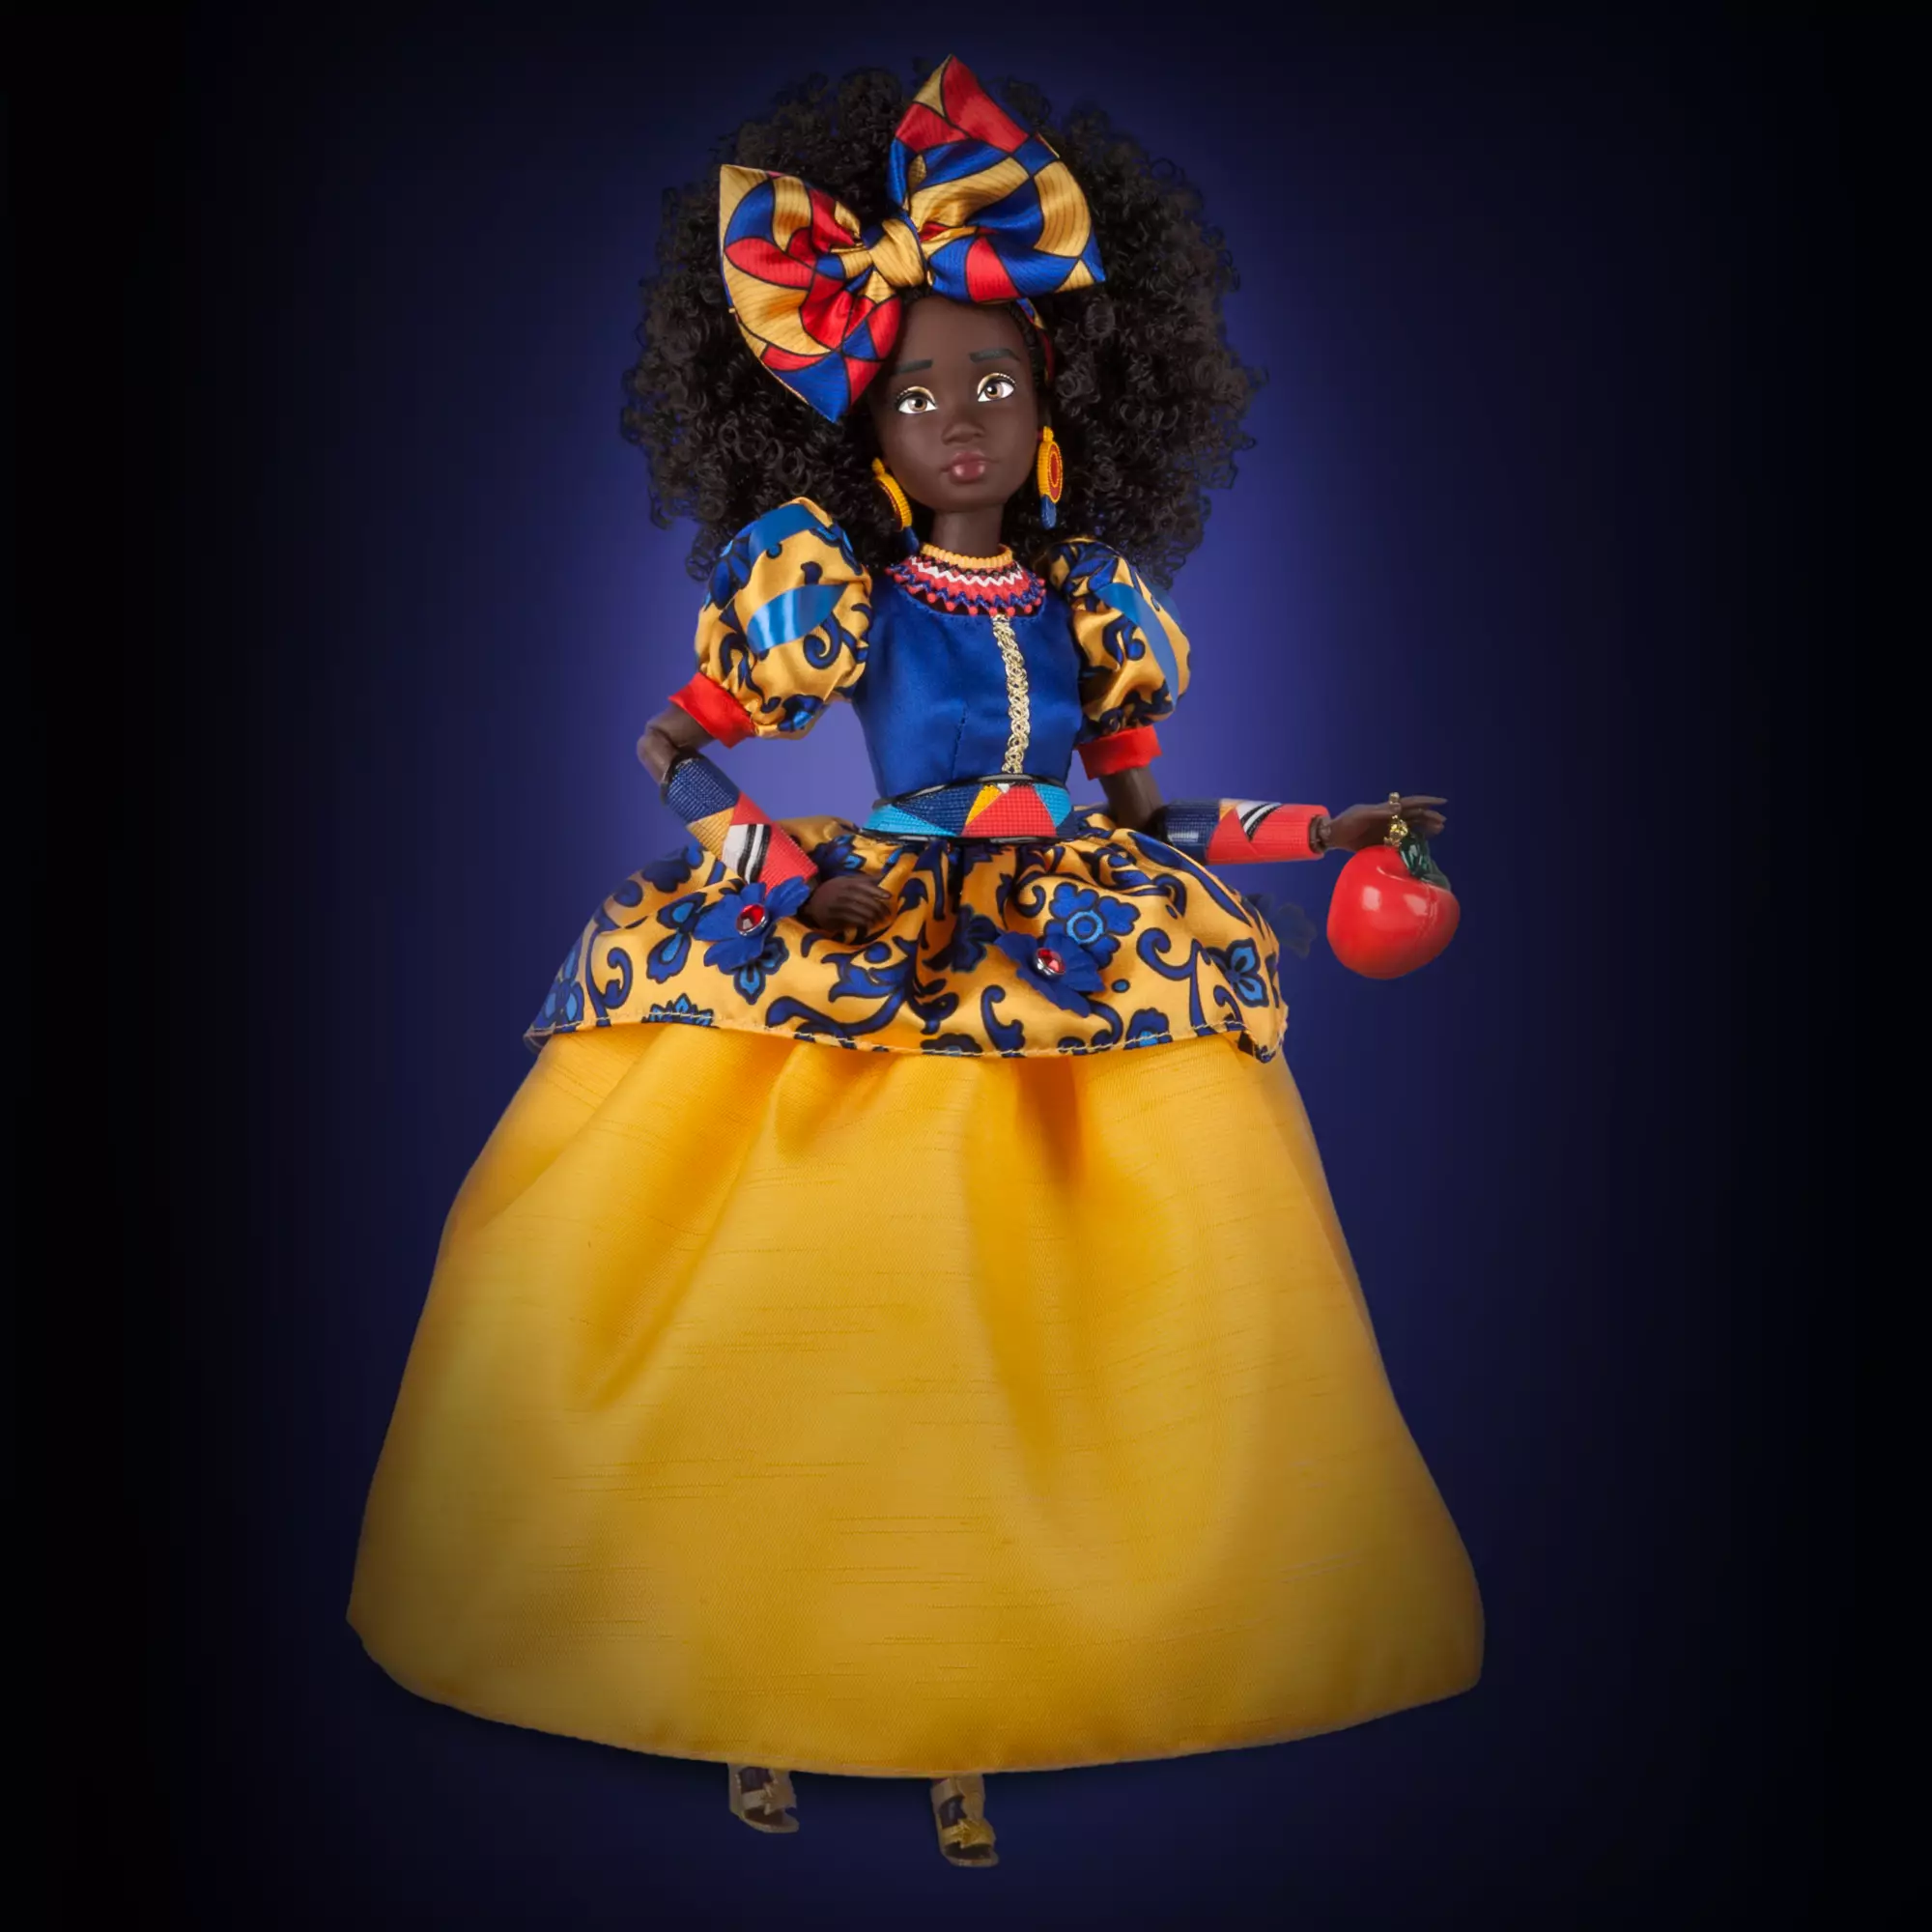 The Newest $130 Designer Doll Features The FIRST Disney Princess